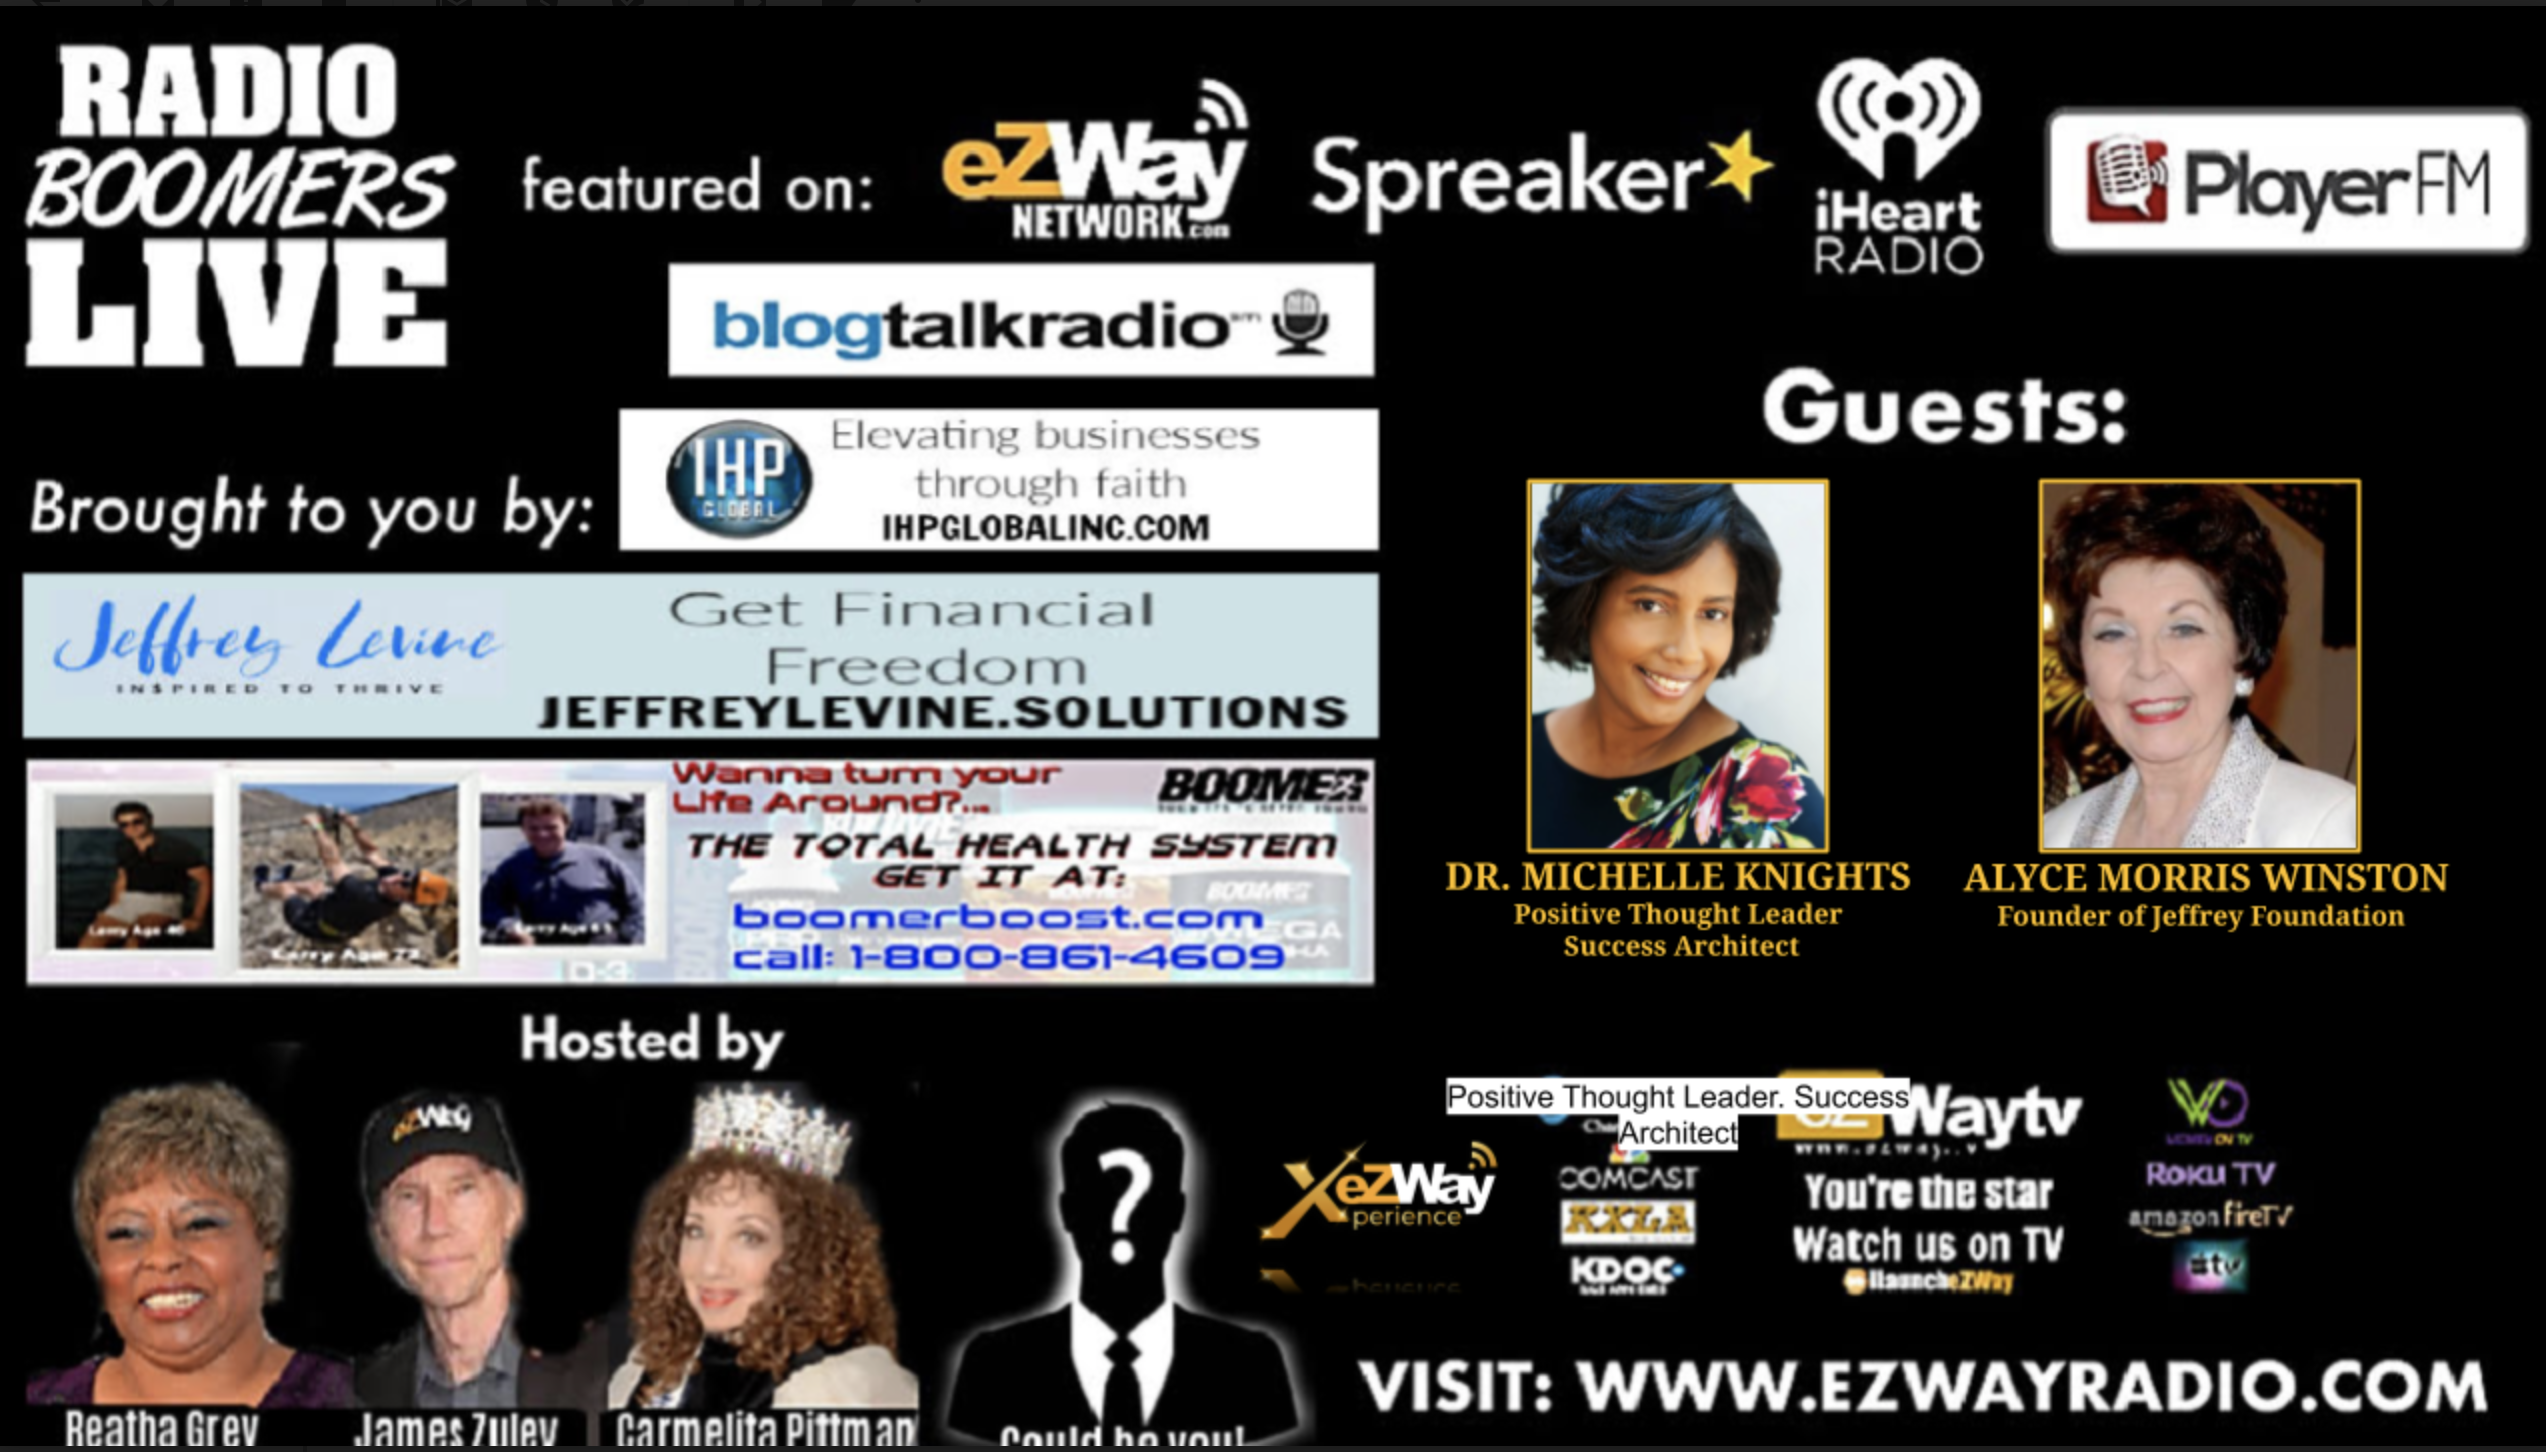 RBL LIVE Feat. Dr. Michelle Knights and Alyce Morris Winston